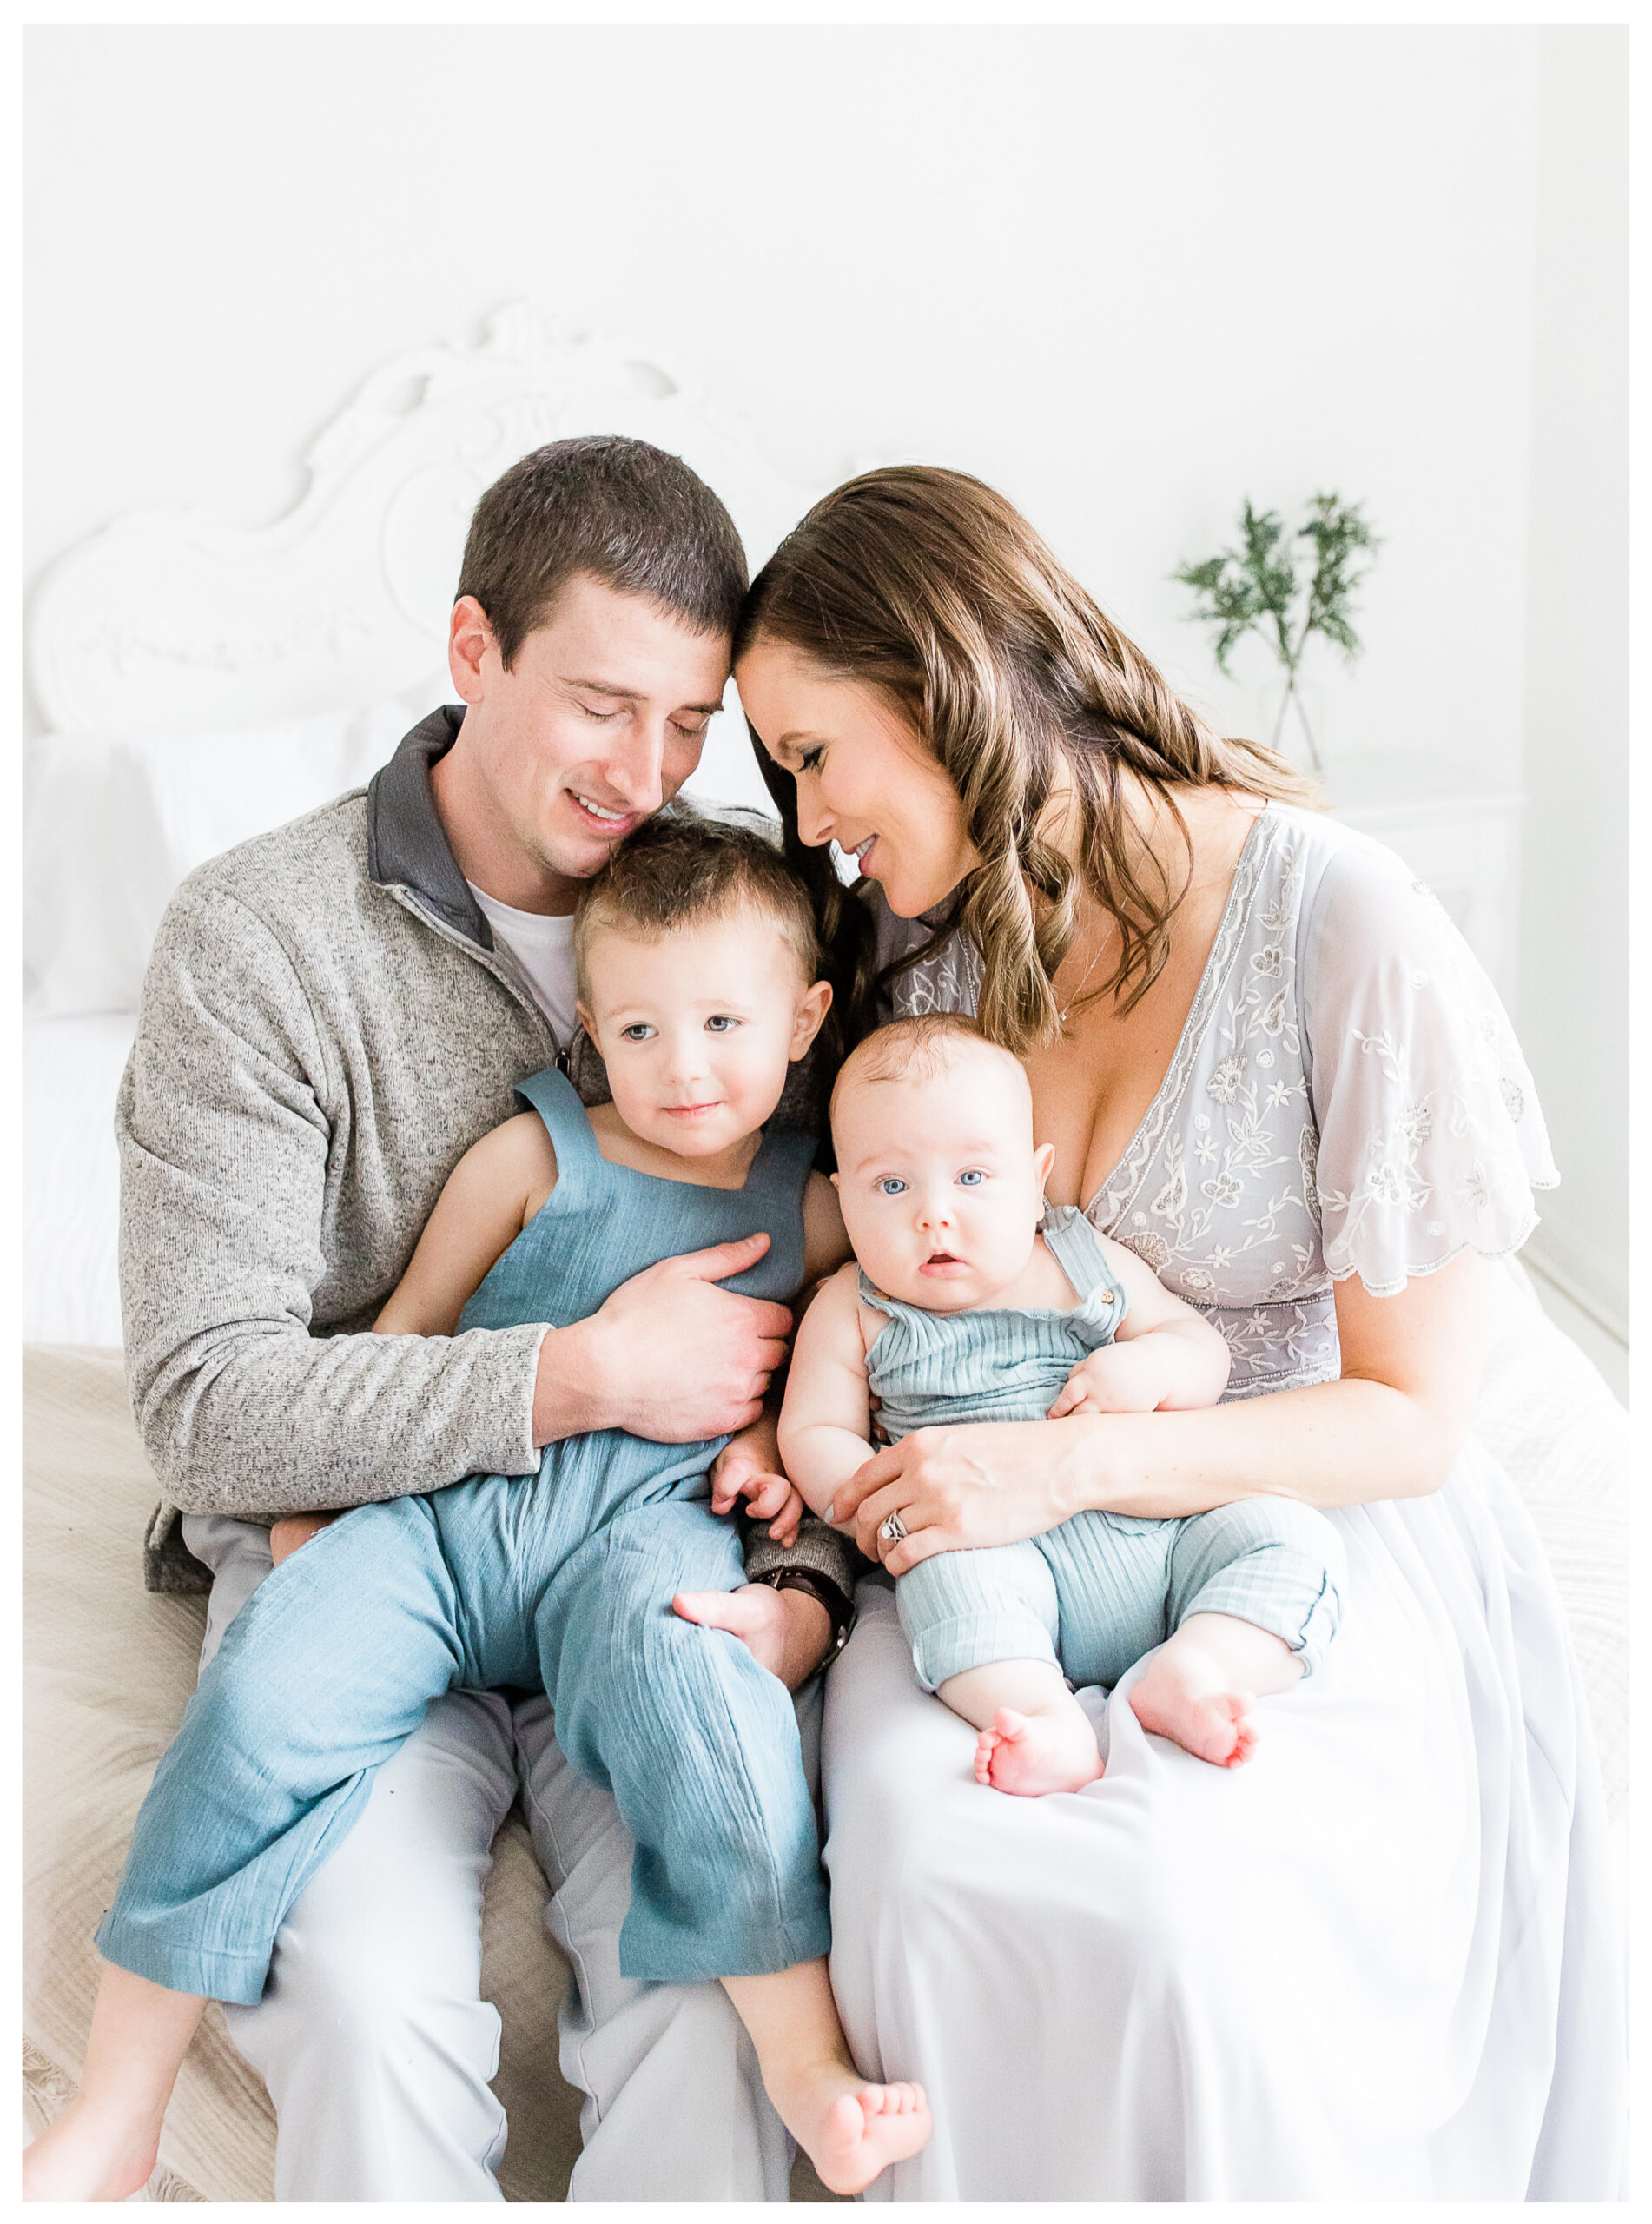 Dayton Baby and Family Photography | Winter Freire Photography | Dayton, Ohio Photographer | Organic Baby Milestone Studio Session Centerville, OH | Timeless Organic Child and Family Portraits